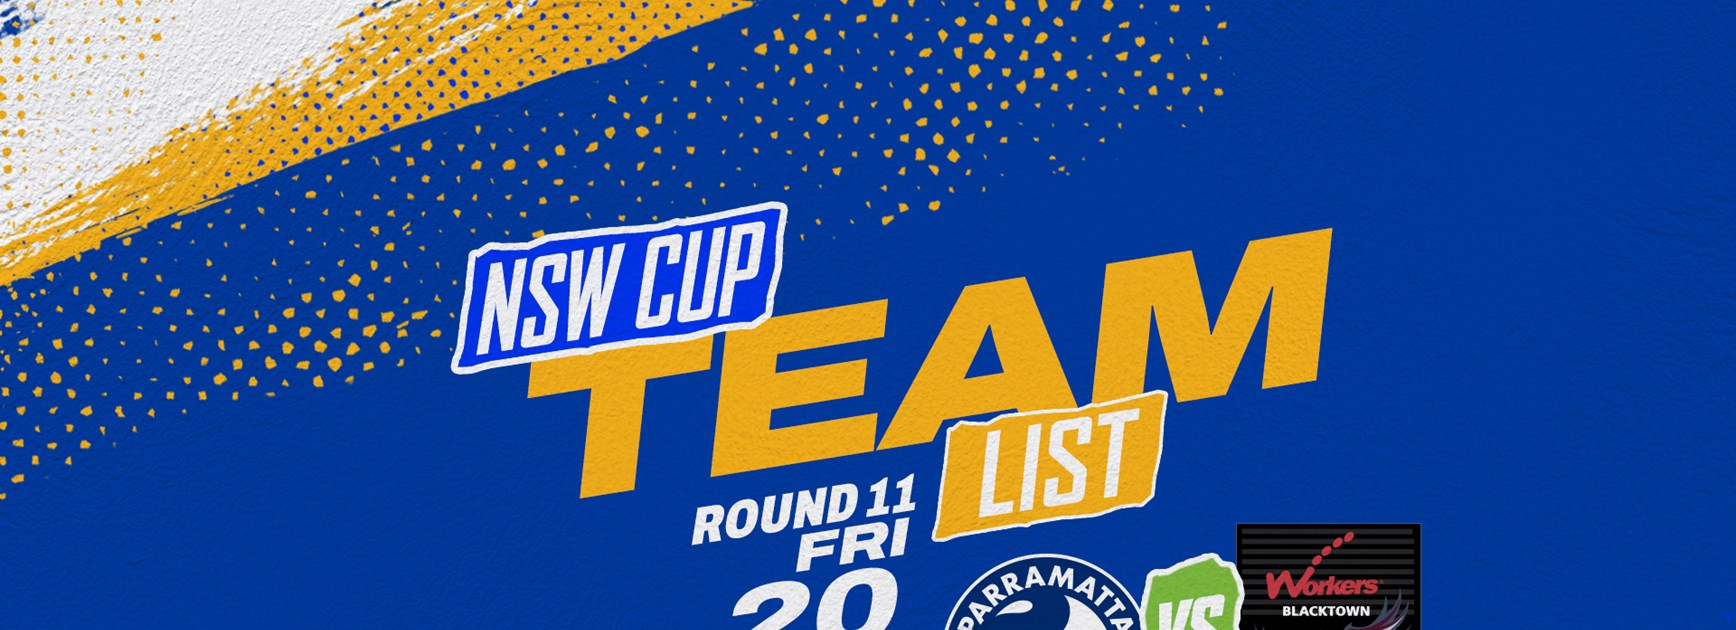 NSW Cup Team List - Eels v Sea Eagles, Round 11